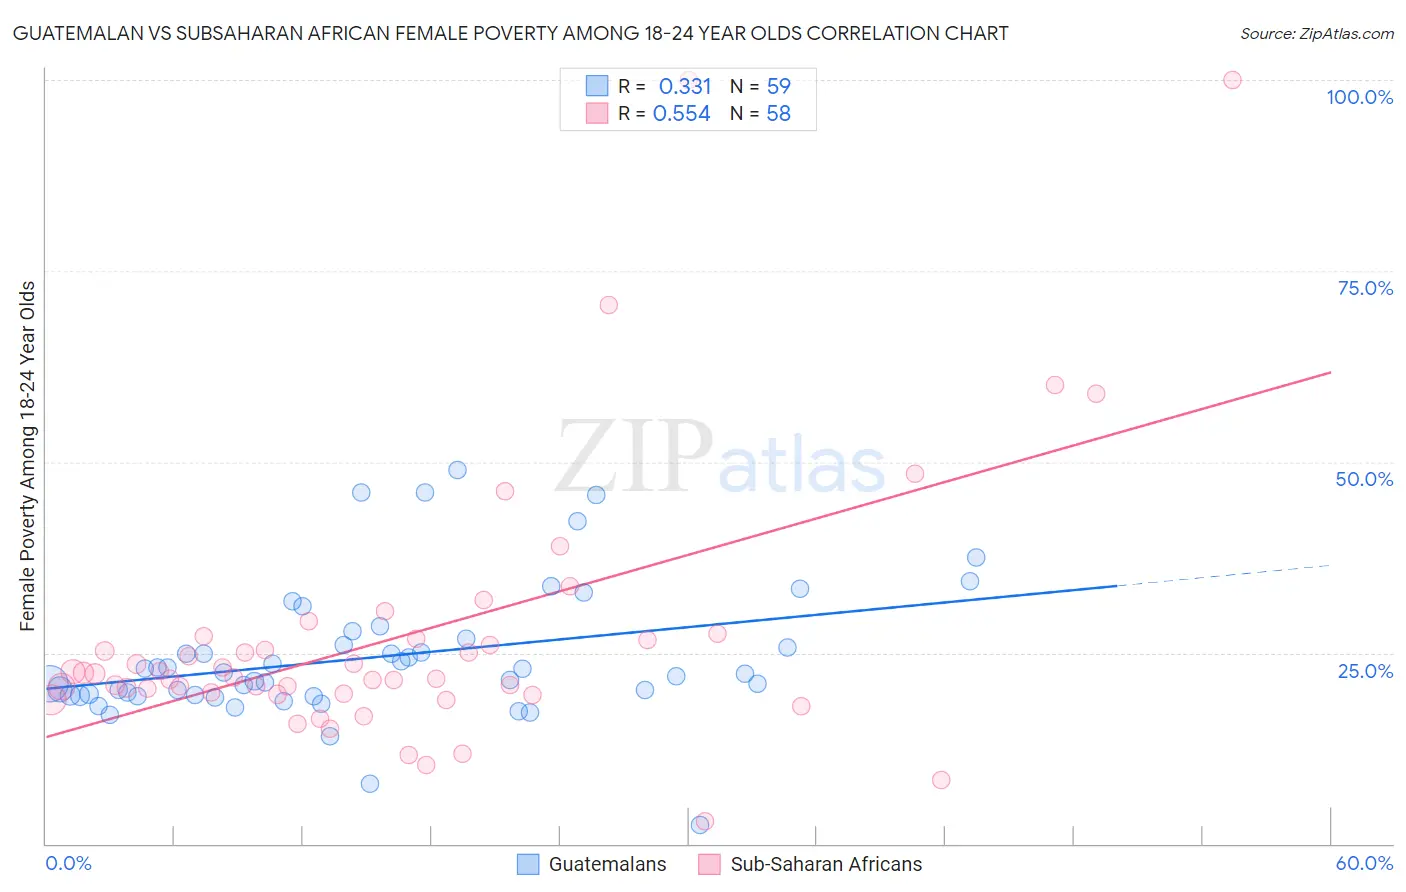 Guatemalan vs Subsaharan African Female Poverty Among 18-24 Year Olds